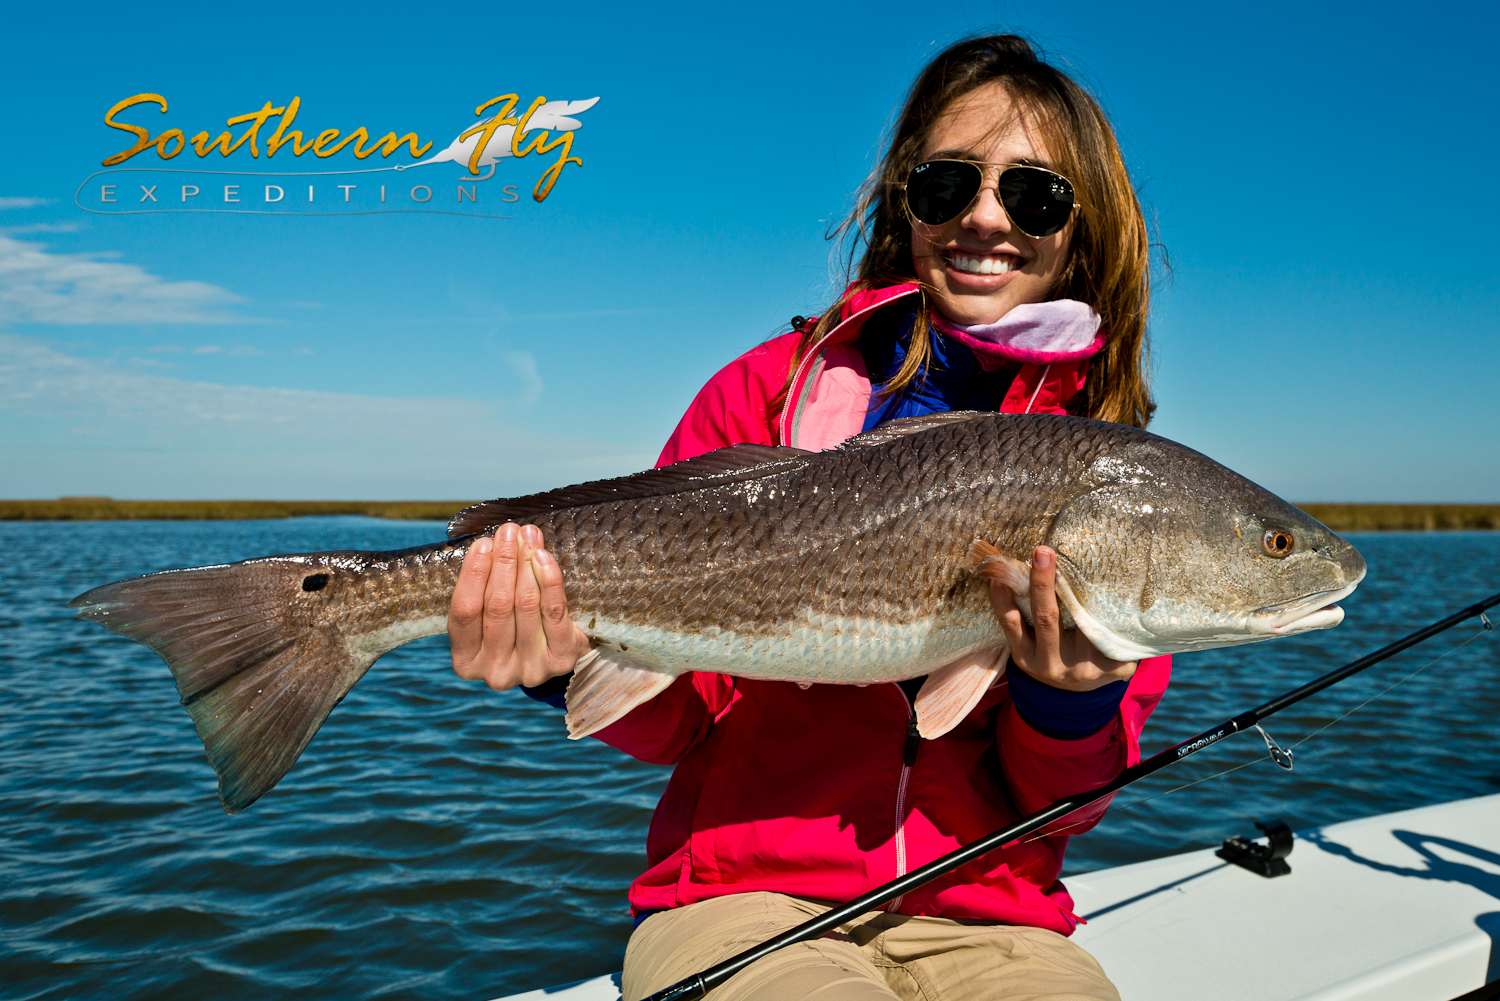 Fly Fishing Photos January 2015 with Southern Fly Expeditions